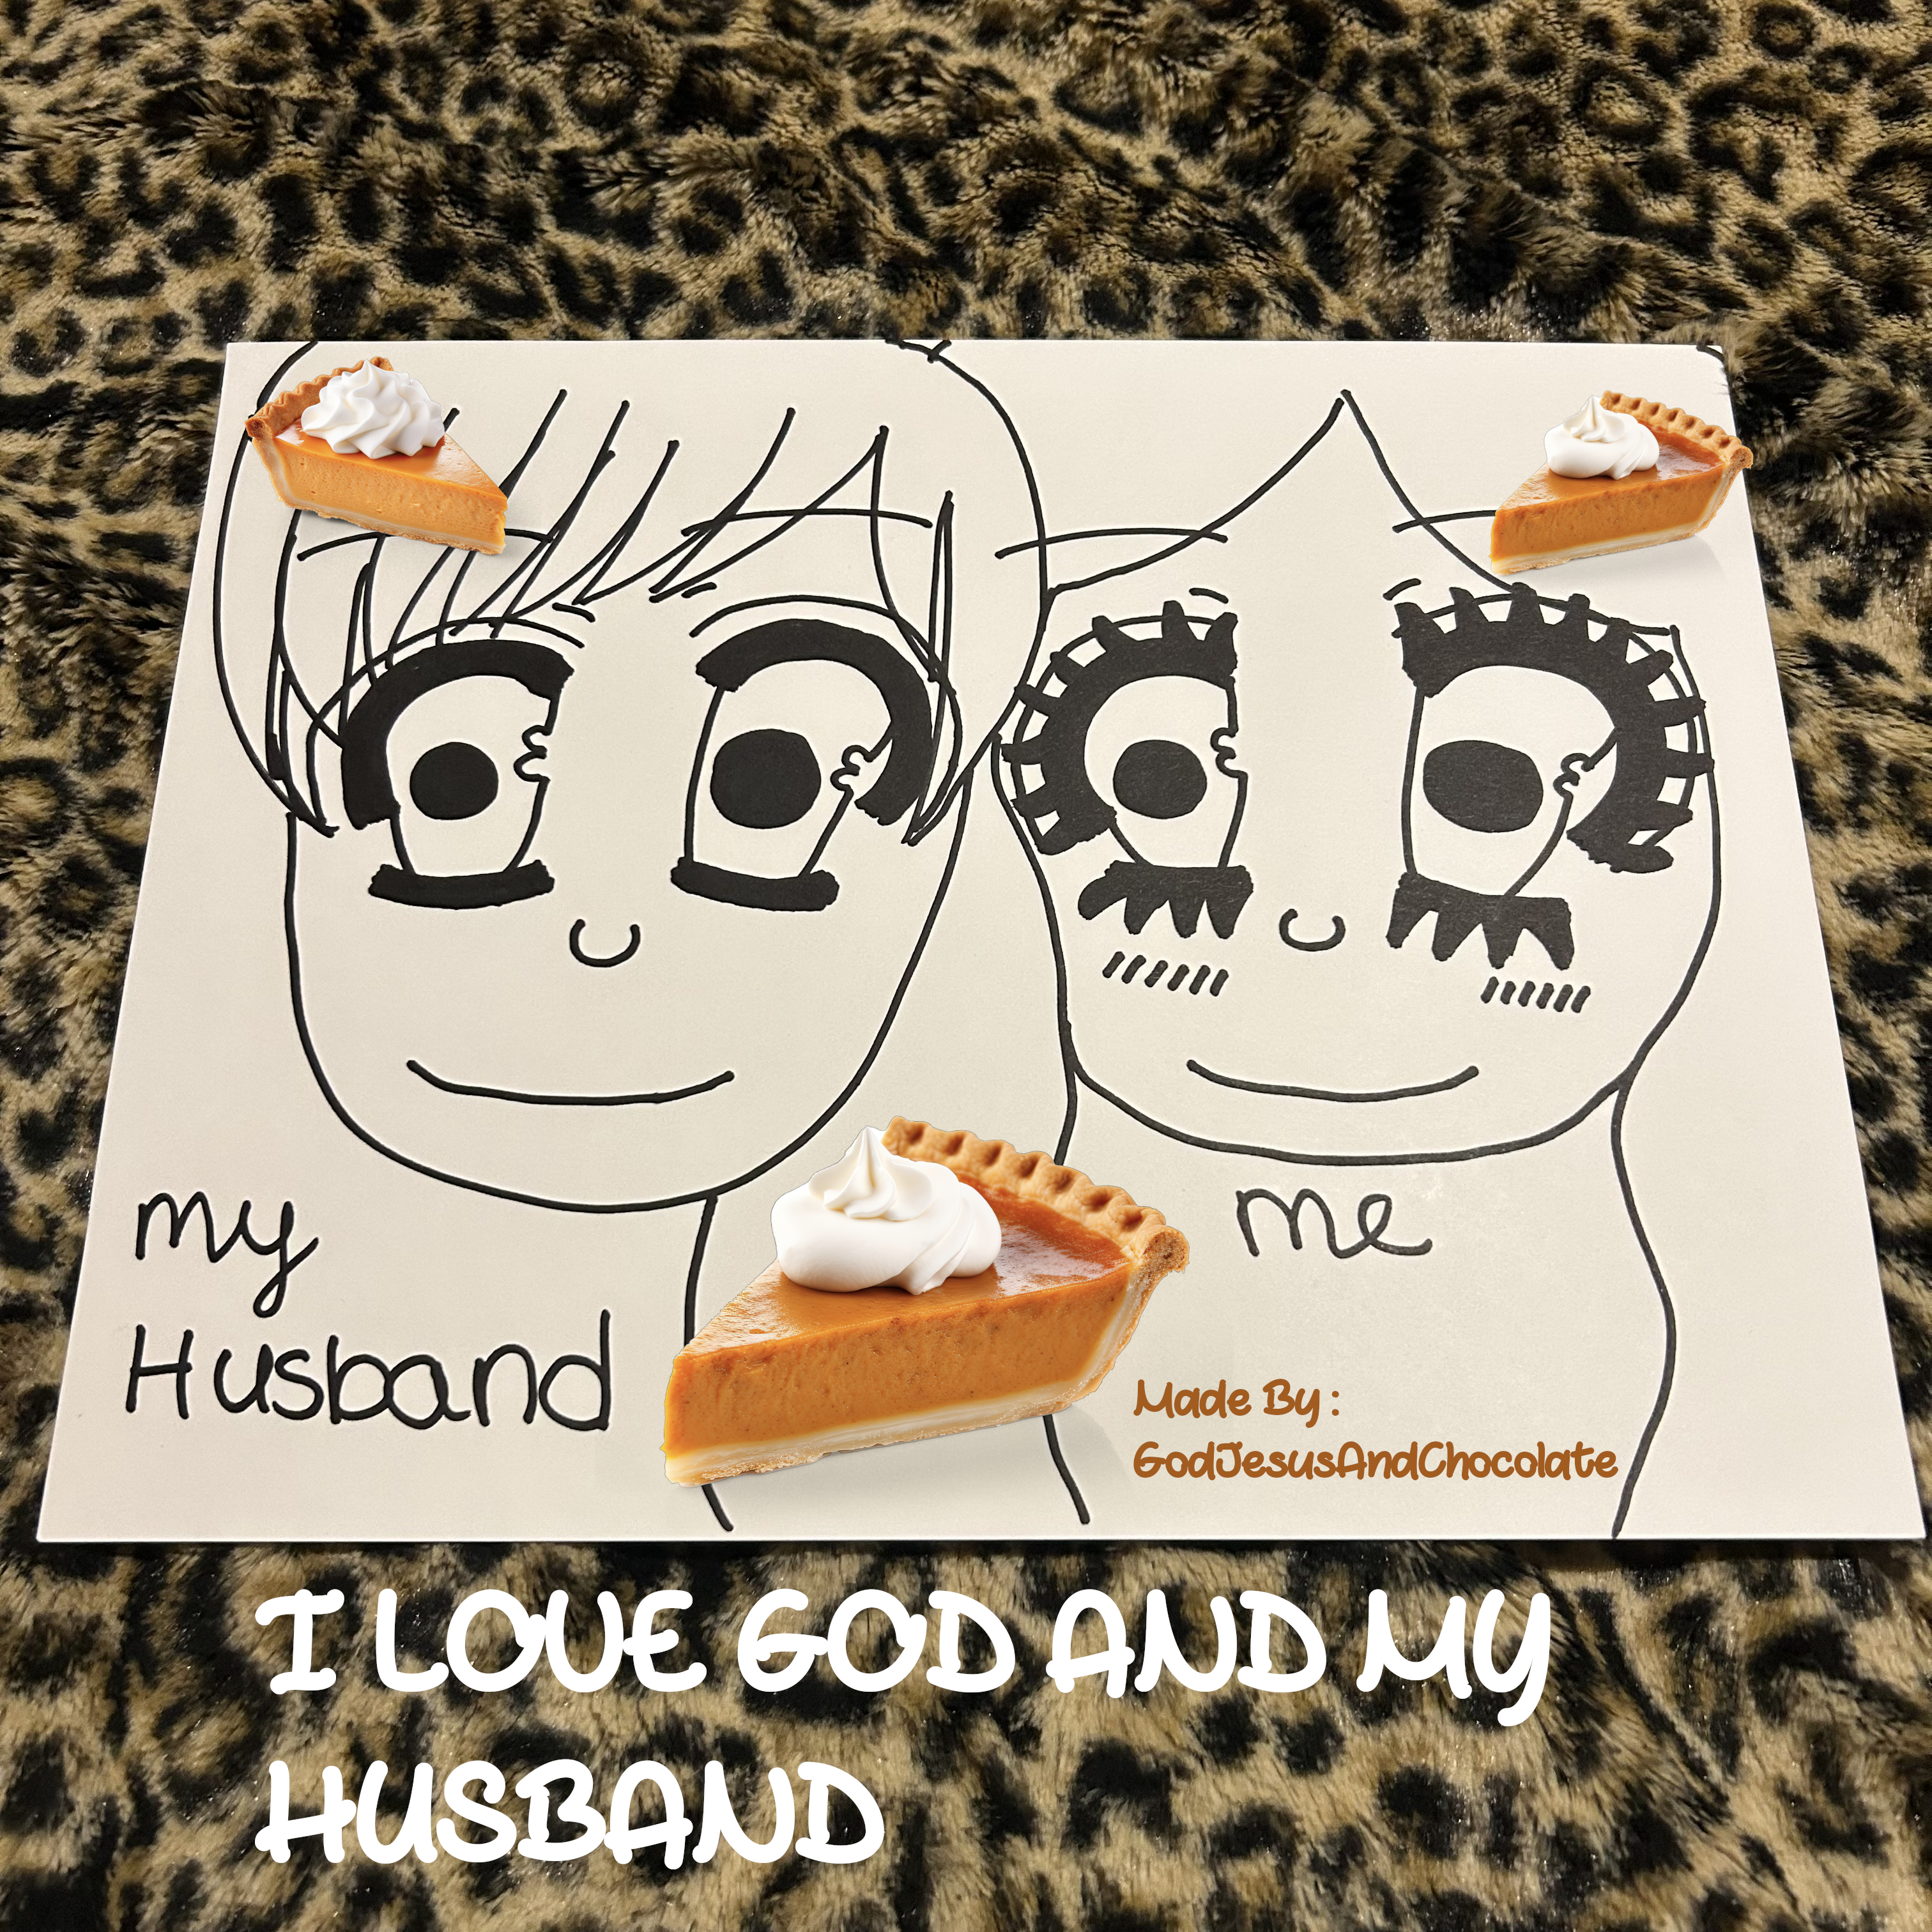 IMG-1875 With Pumpkin Pies With Signature I Love God And My Husband.jpg